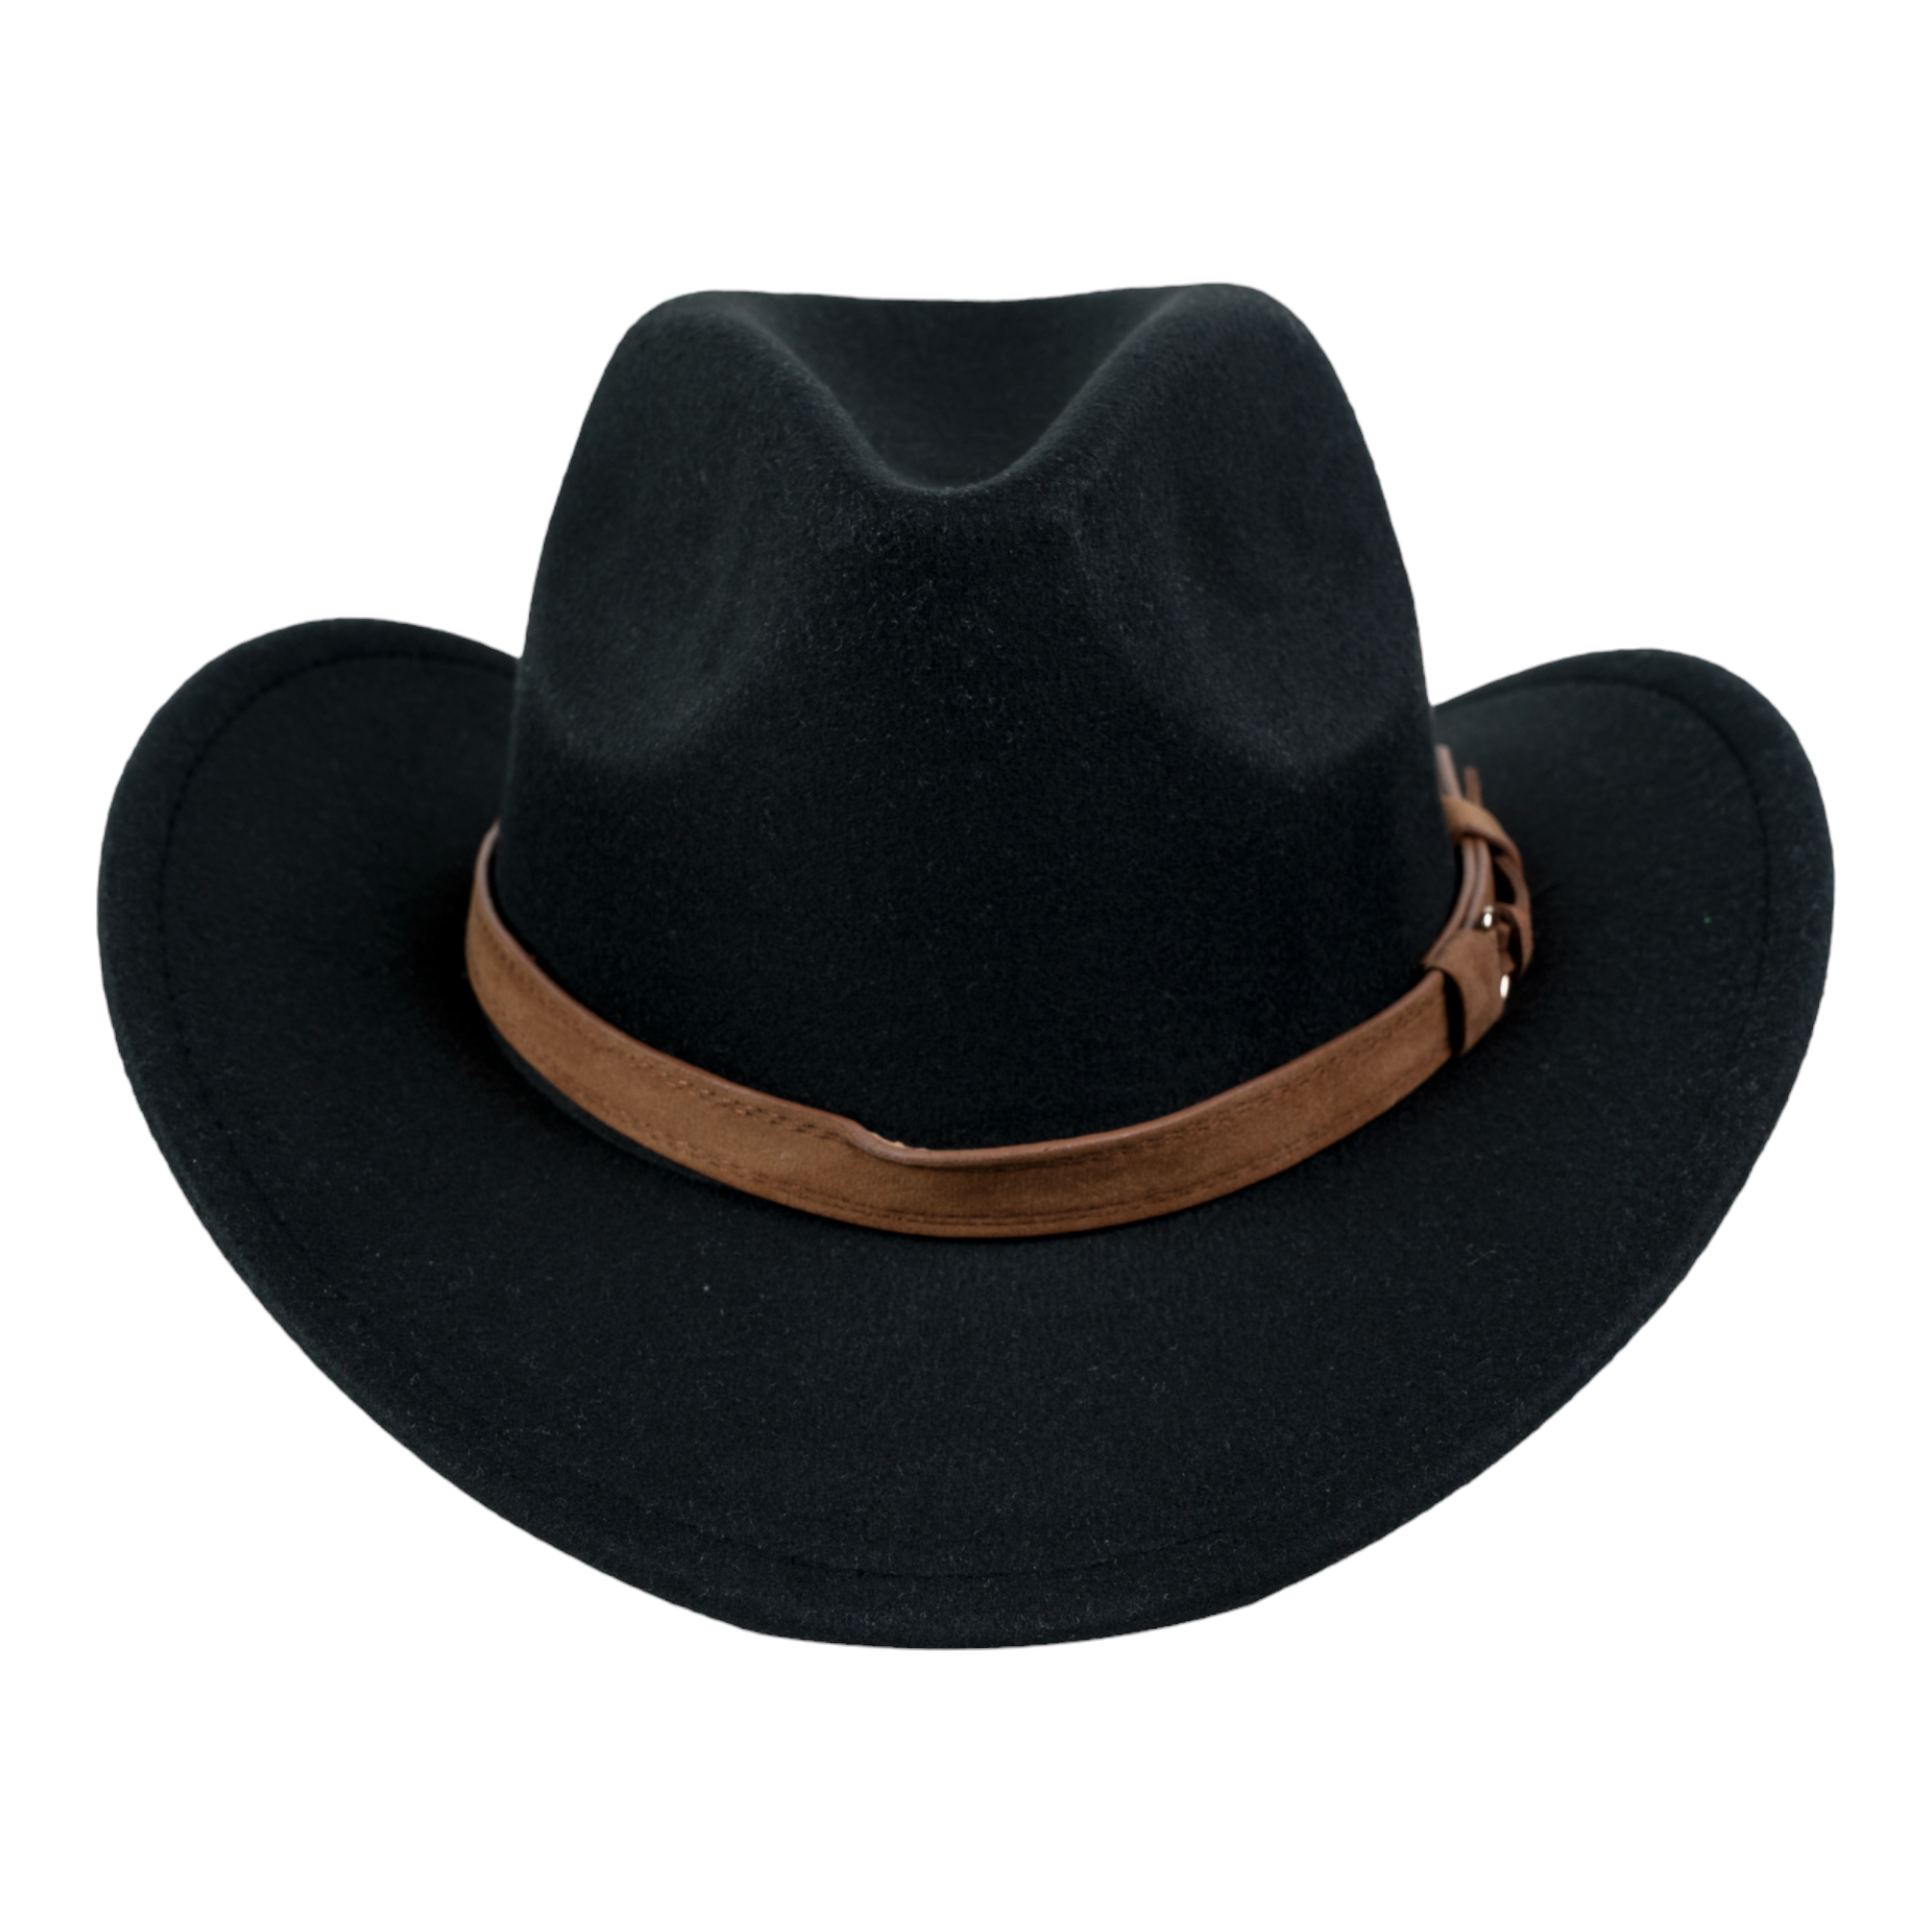 Chokore Pinched Cowboy Hat with PU Leather Belt (Black)